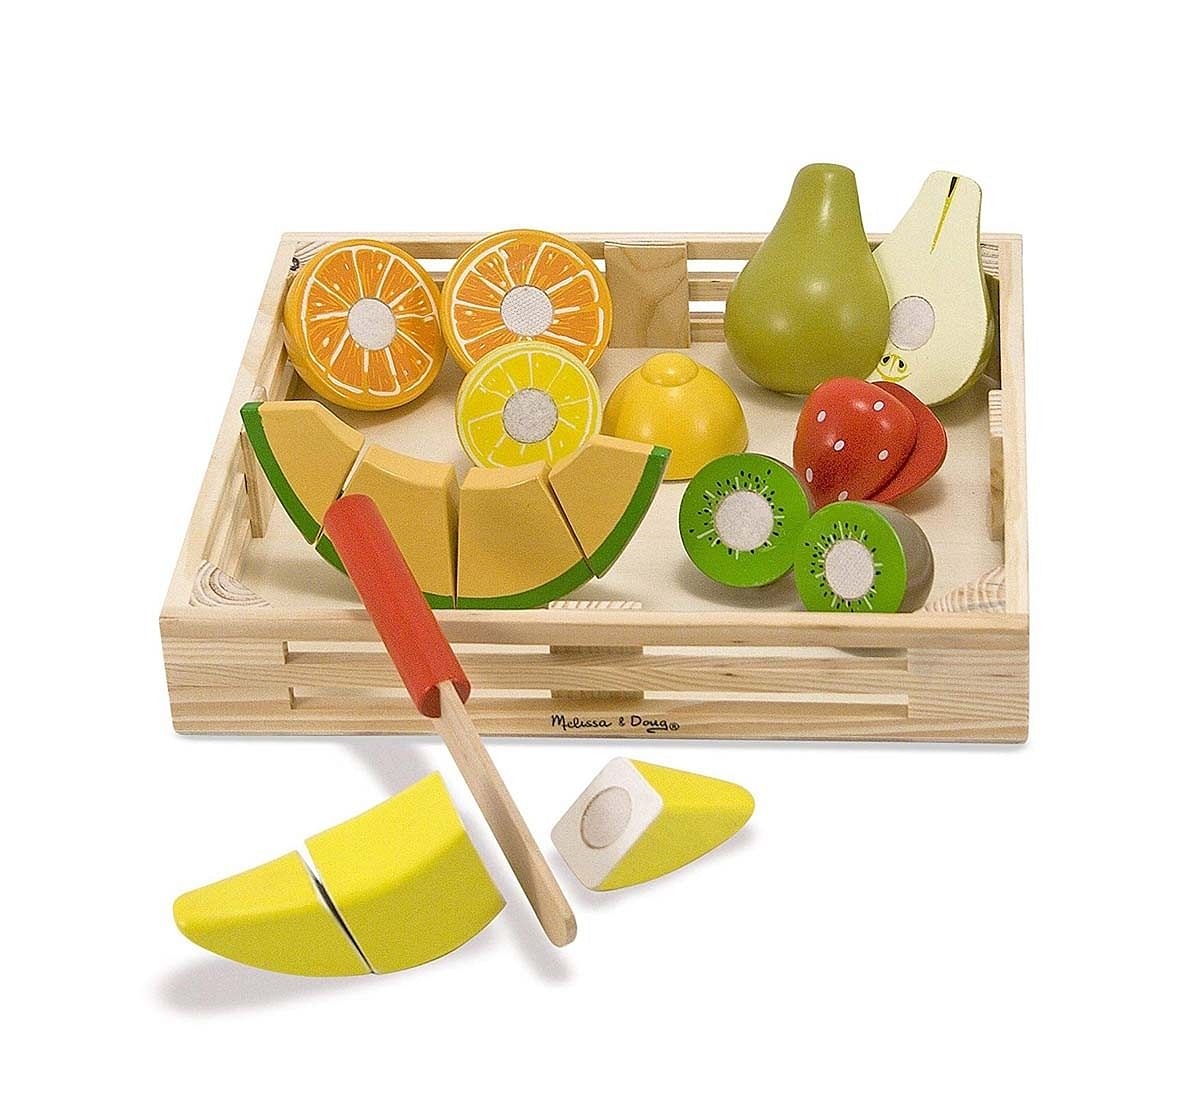 Melissa And Doug Cutting Fruit Supermarket & Food Playsets for Kids Age 3Y+